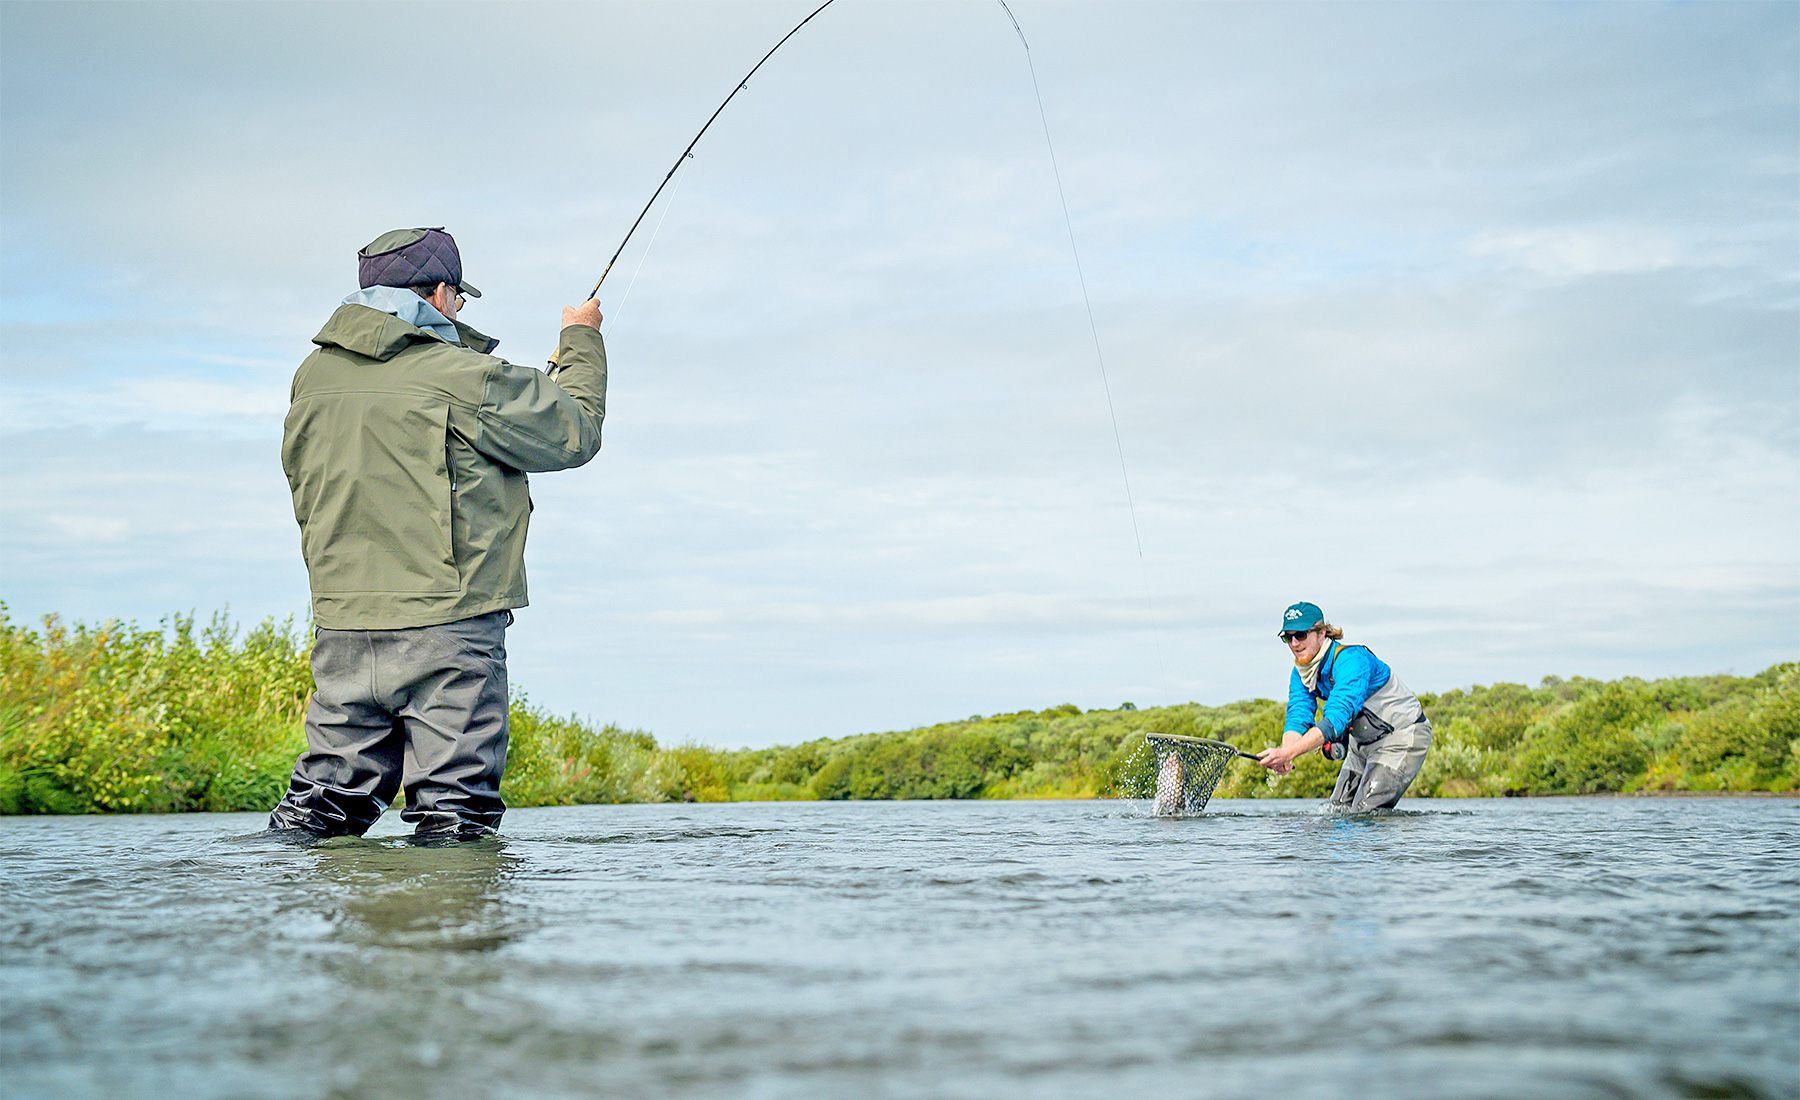 Signature Fly Fishing Destinations - The Fly Shop®